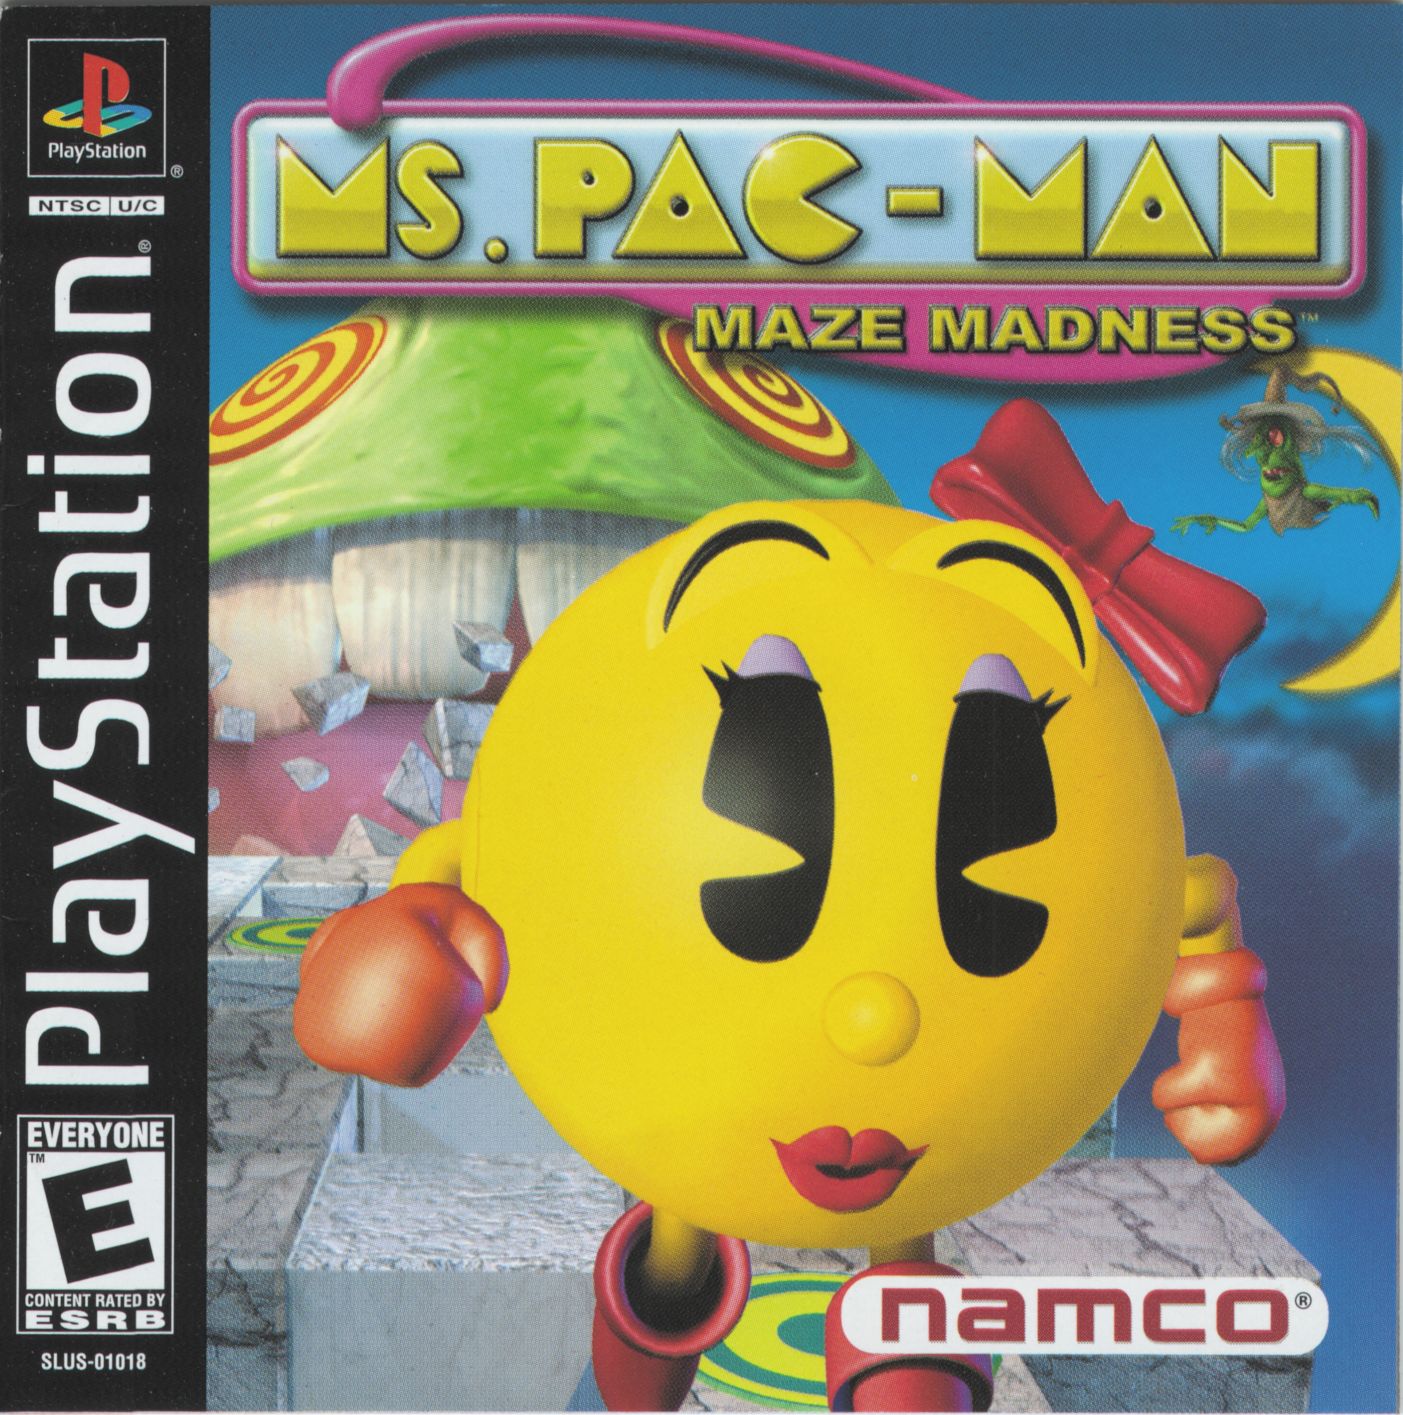 Ms Pac-Man Maze Madness PSX cover